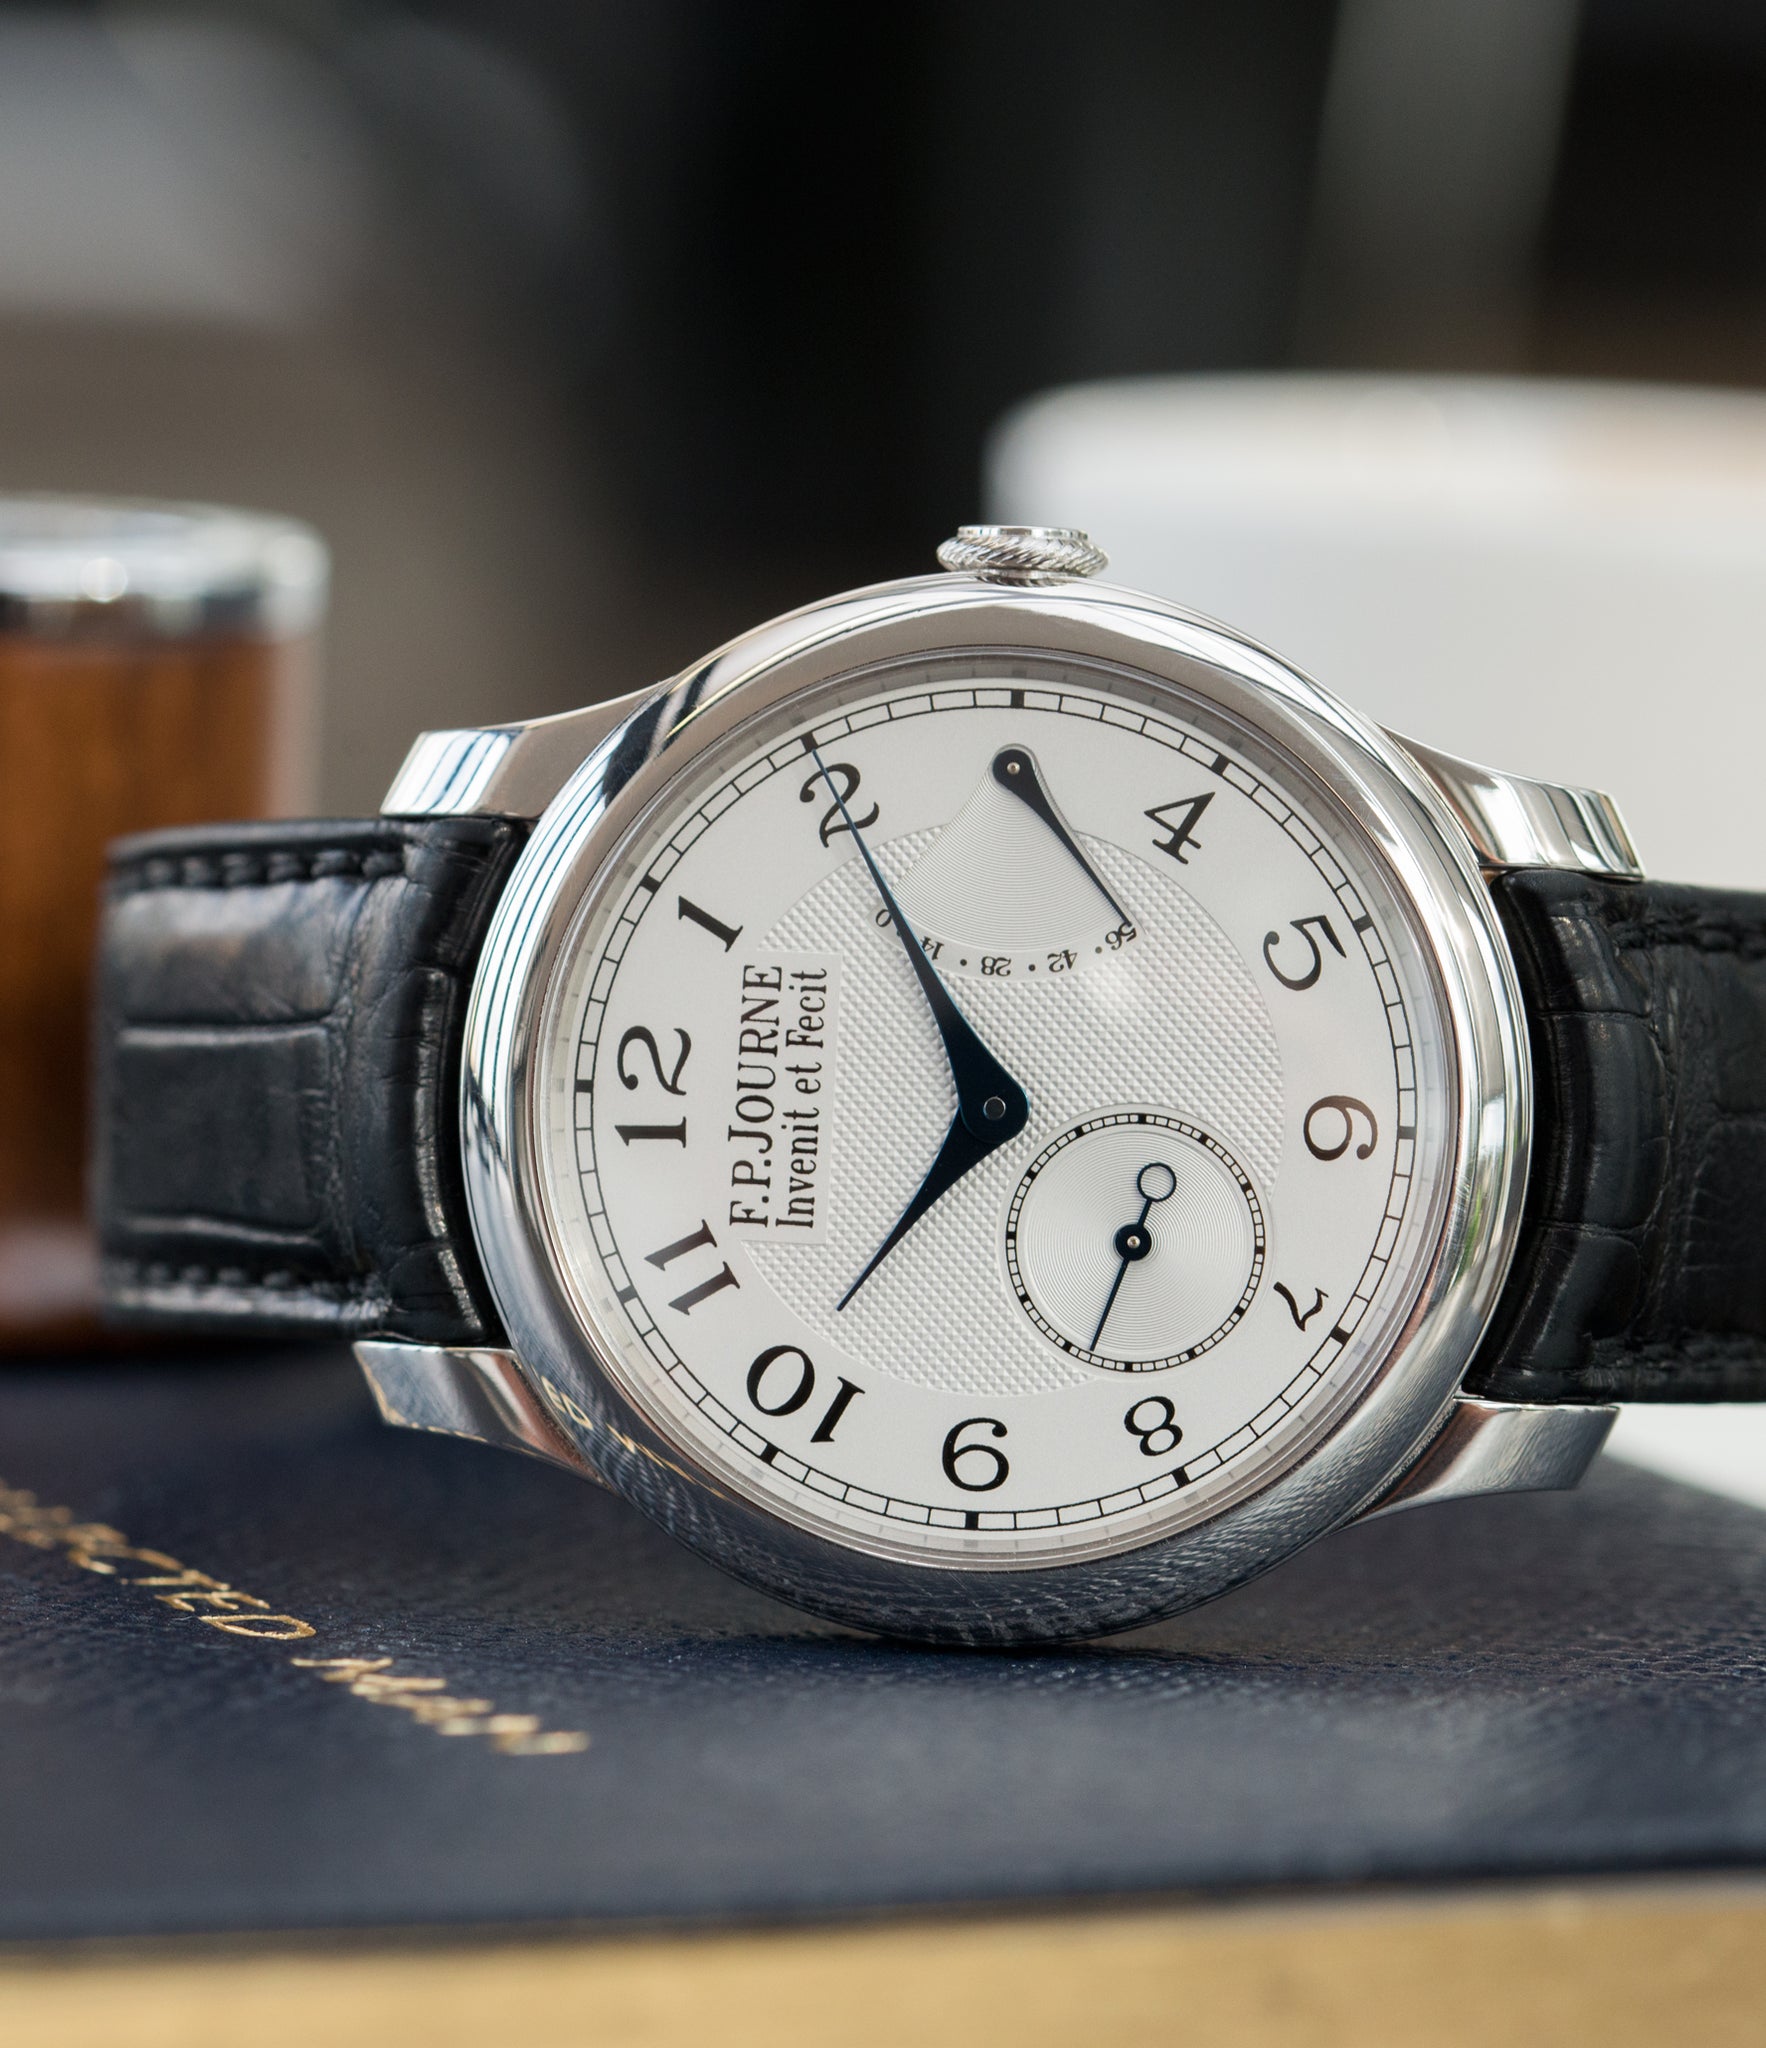 Chronometre Souverain F. P. Journe platinum watch silver dial online at A Collected Man London specialist retailer of independent watchmakers in UK